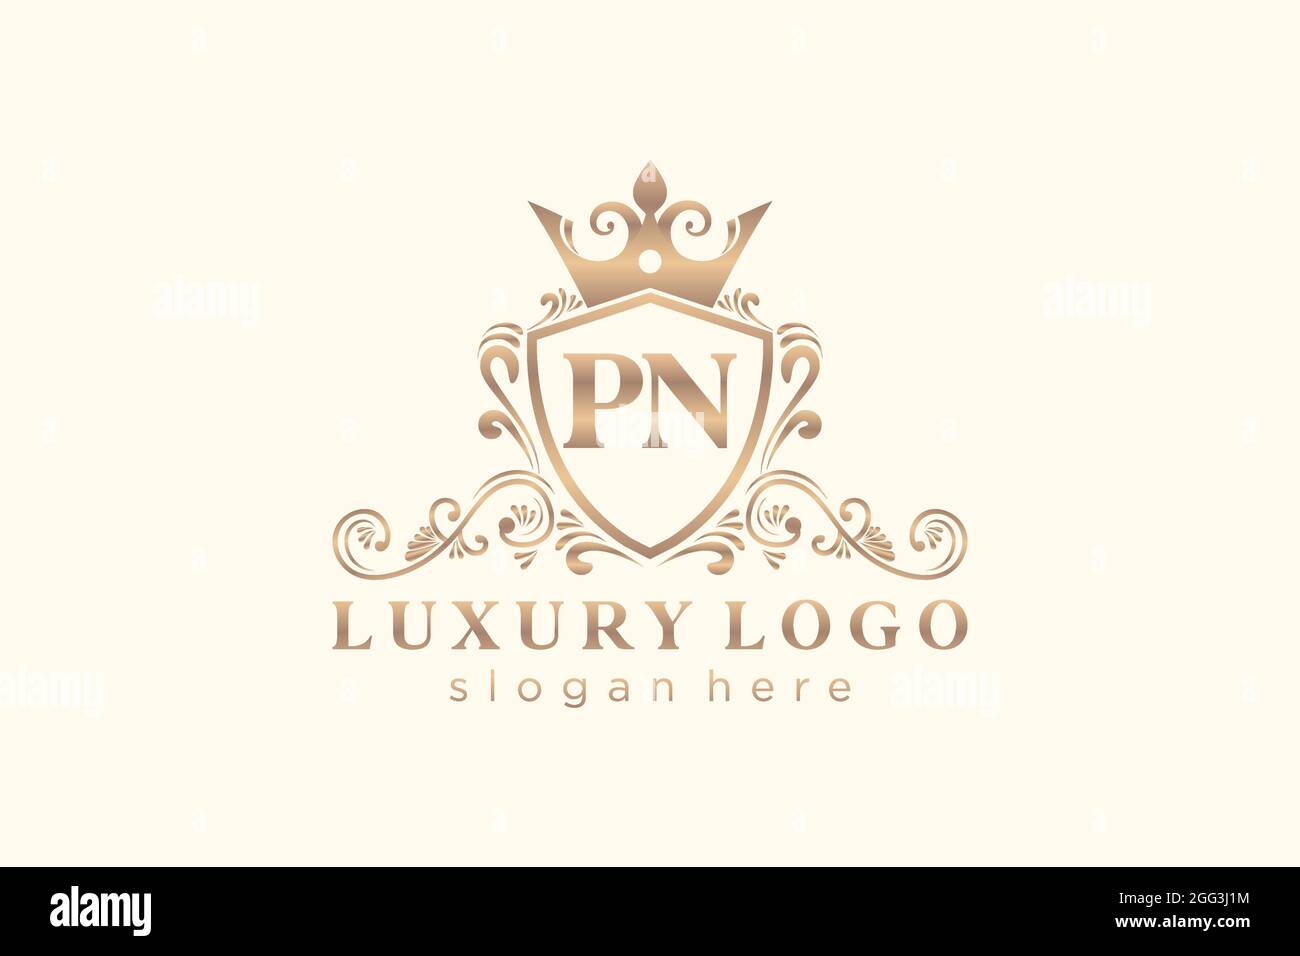 PN Letter Royal Luxury Logo template in vector art for Restaurant, Royalty, Boutique, Cafe, Hotel, Heraldic, Jewelry, Fashion and other vector illustr Stock Vector